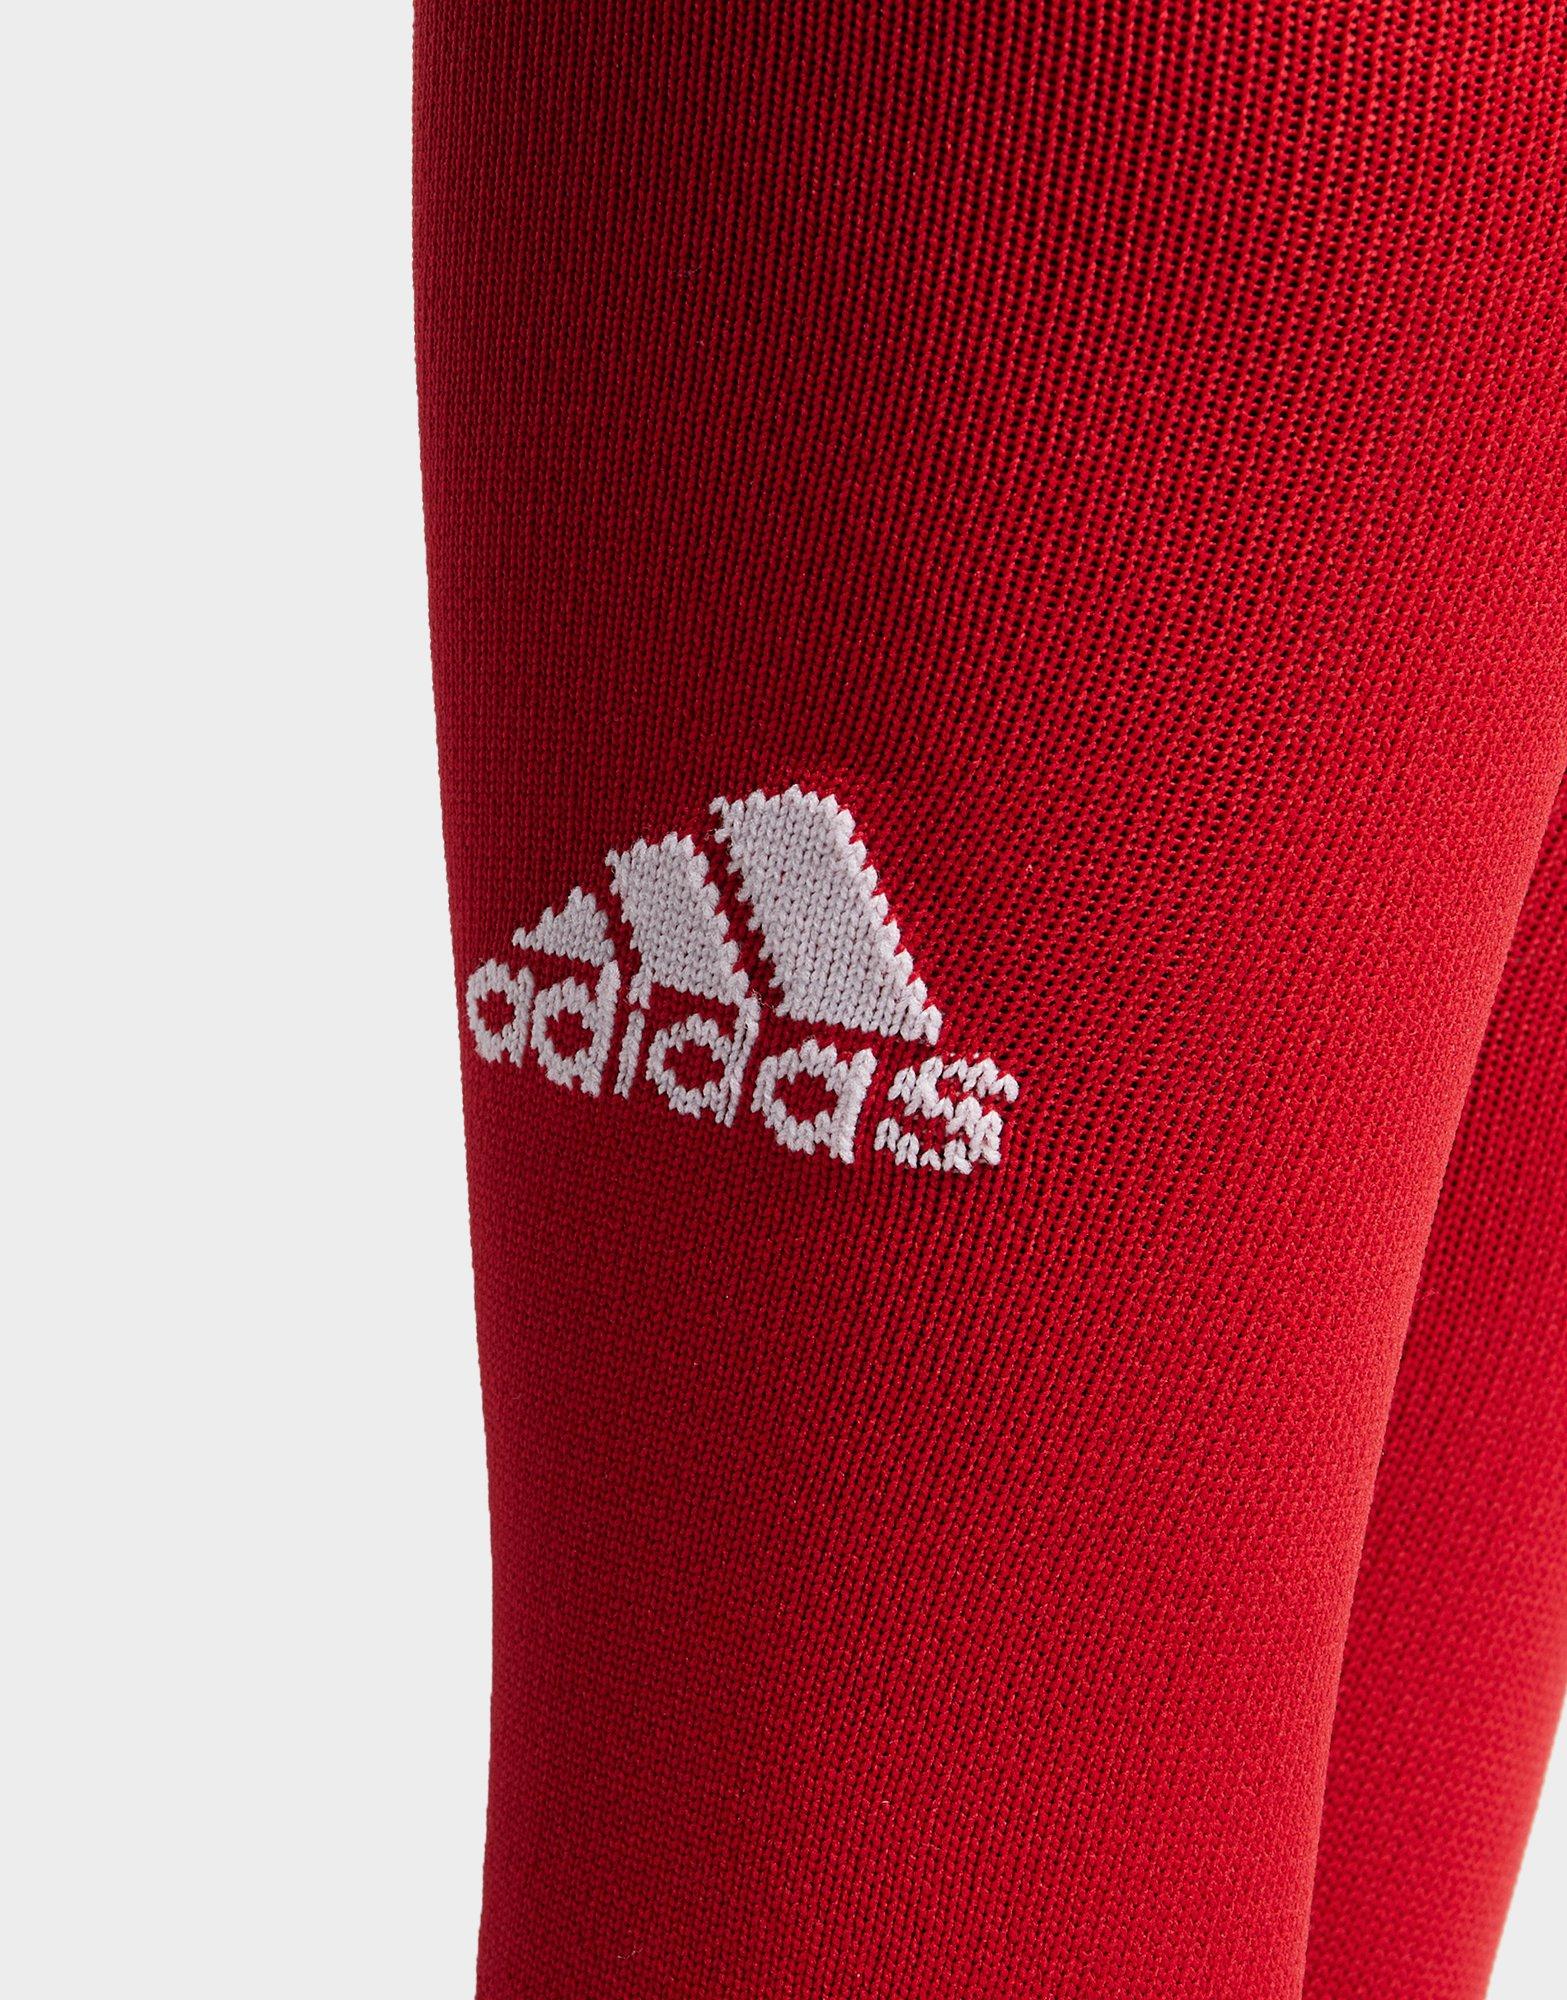 adidas Chaussettes Milano 16 (1 paire) Homme Bleu- JD Sports France